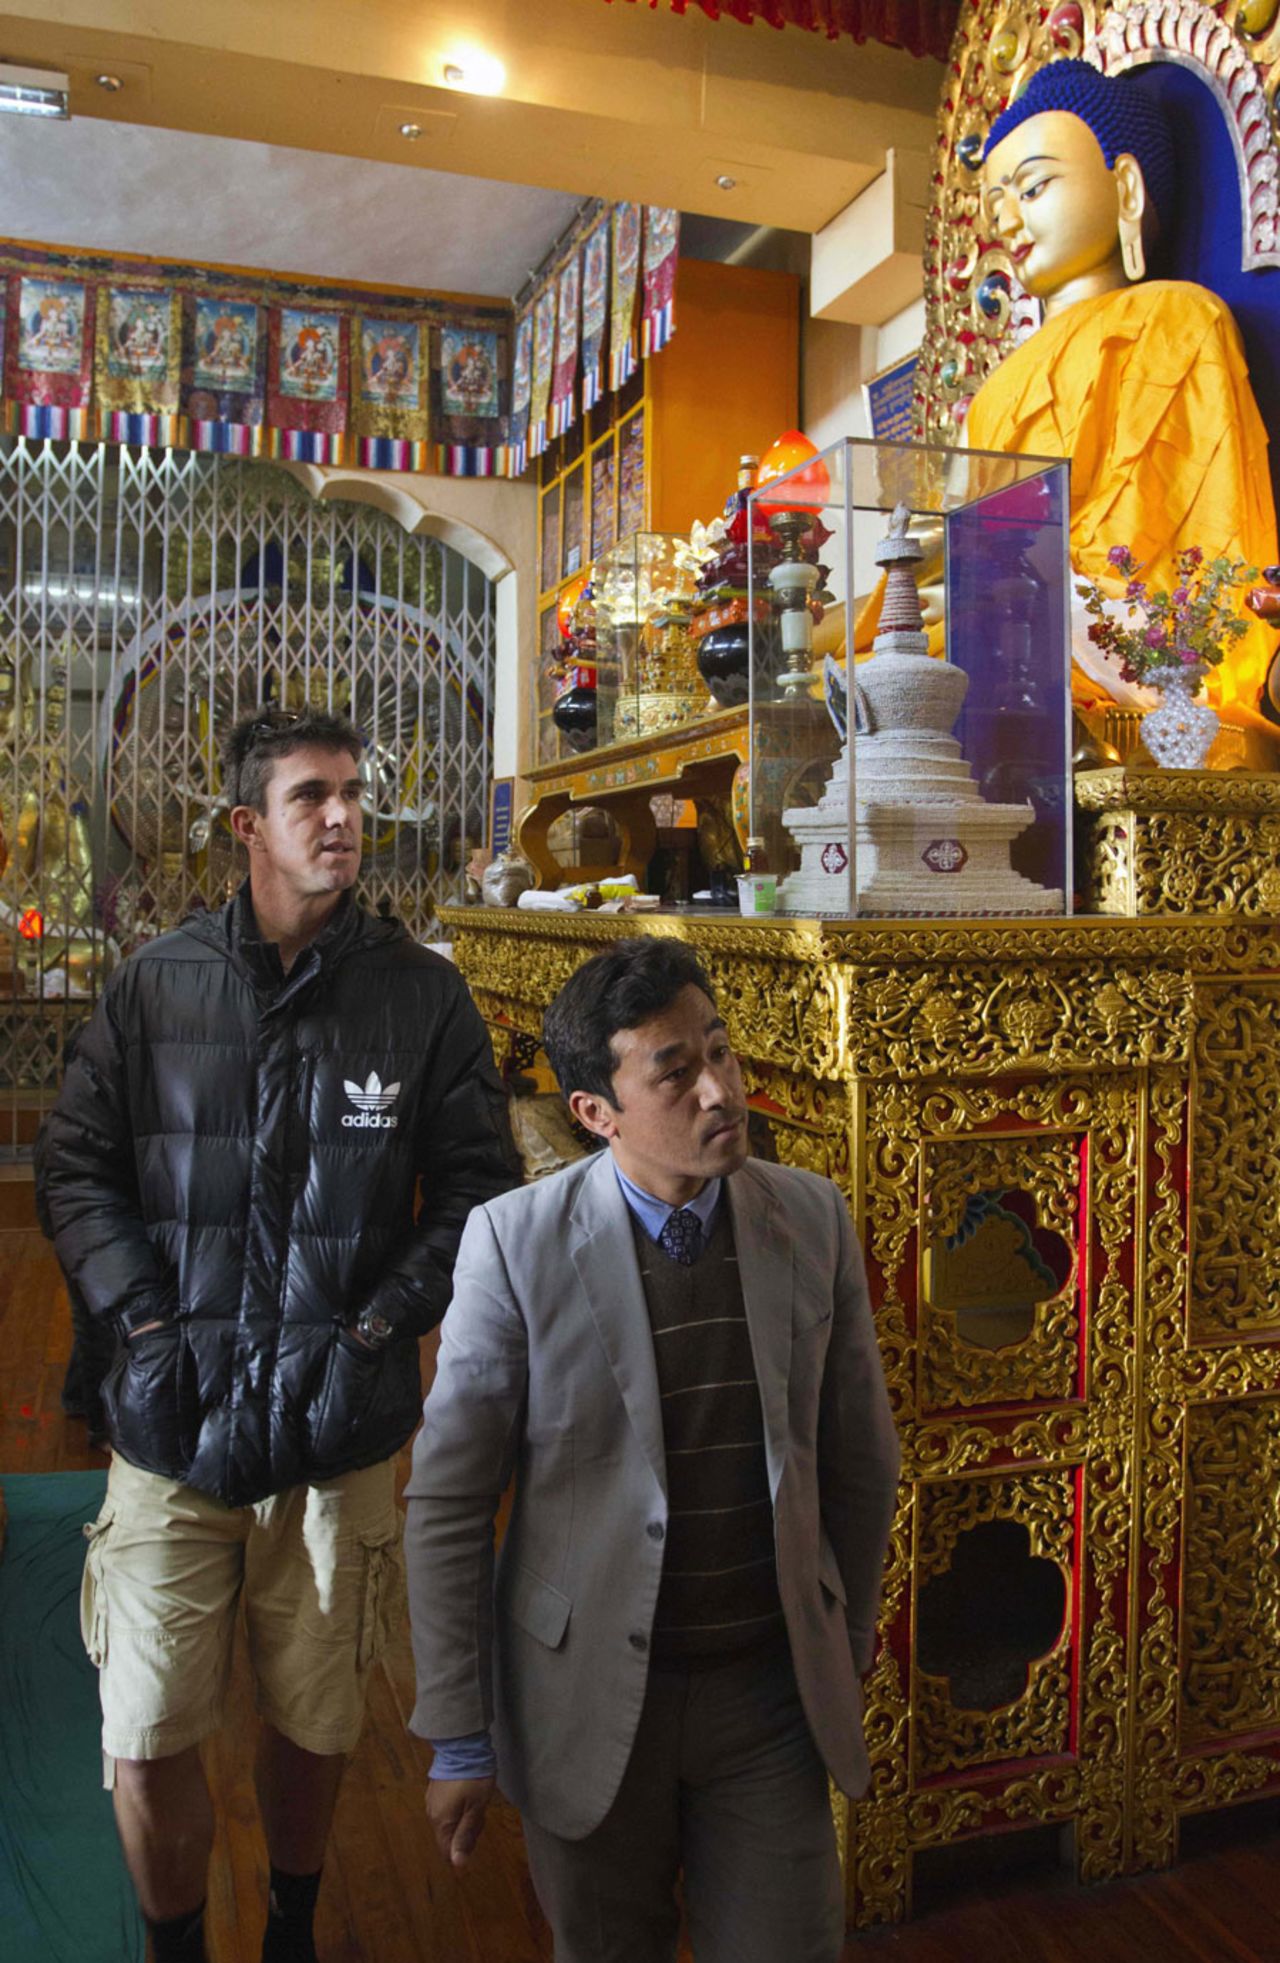 Kevin Pietersen at the Namgyal Monastery in Dharamsala, January 25, 2013 